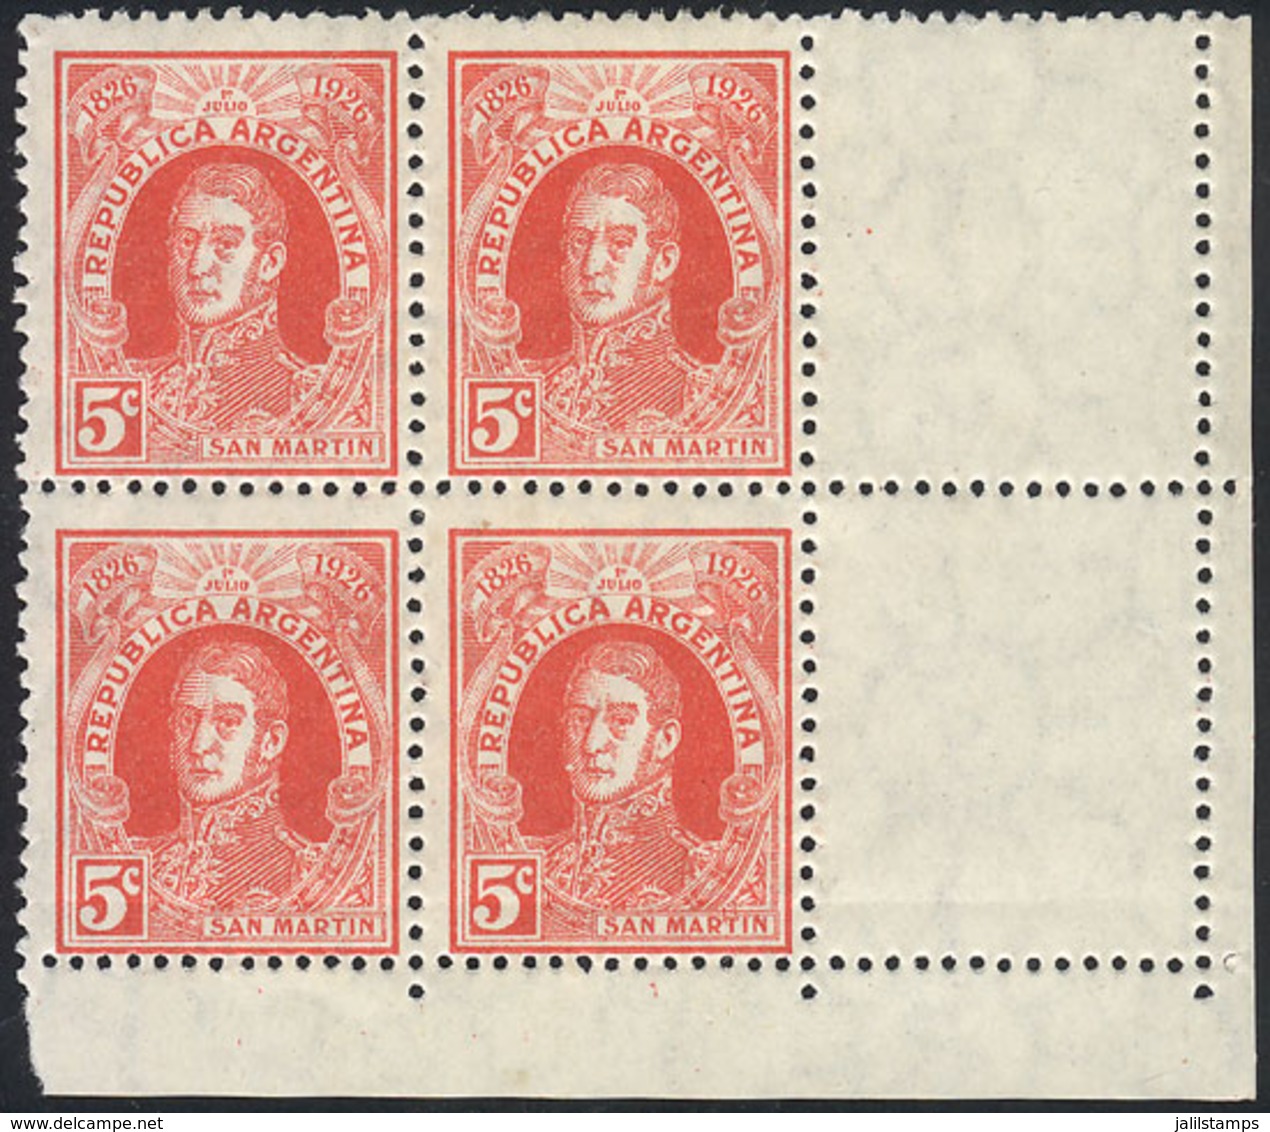 ARGENTINA: GJ.622CD, 1926 5c. San Martín, Block Of 4 With LABELS AT RIGHT, Very Nice! - Storia Postale